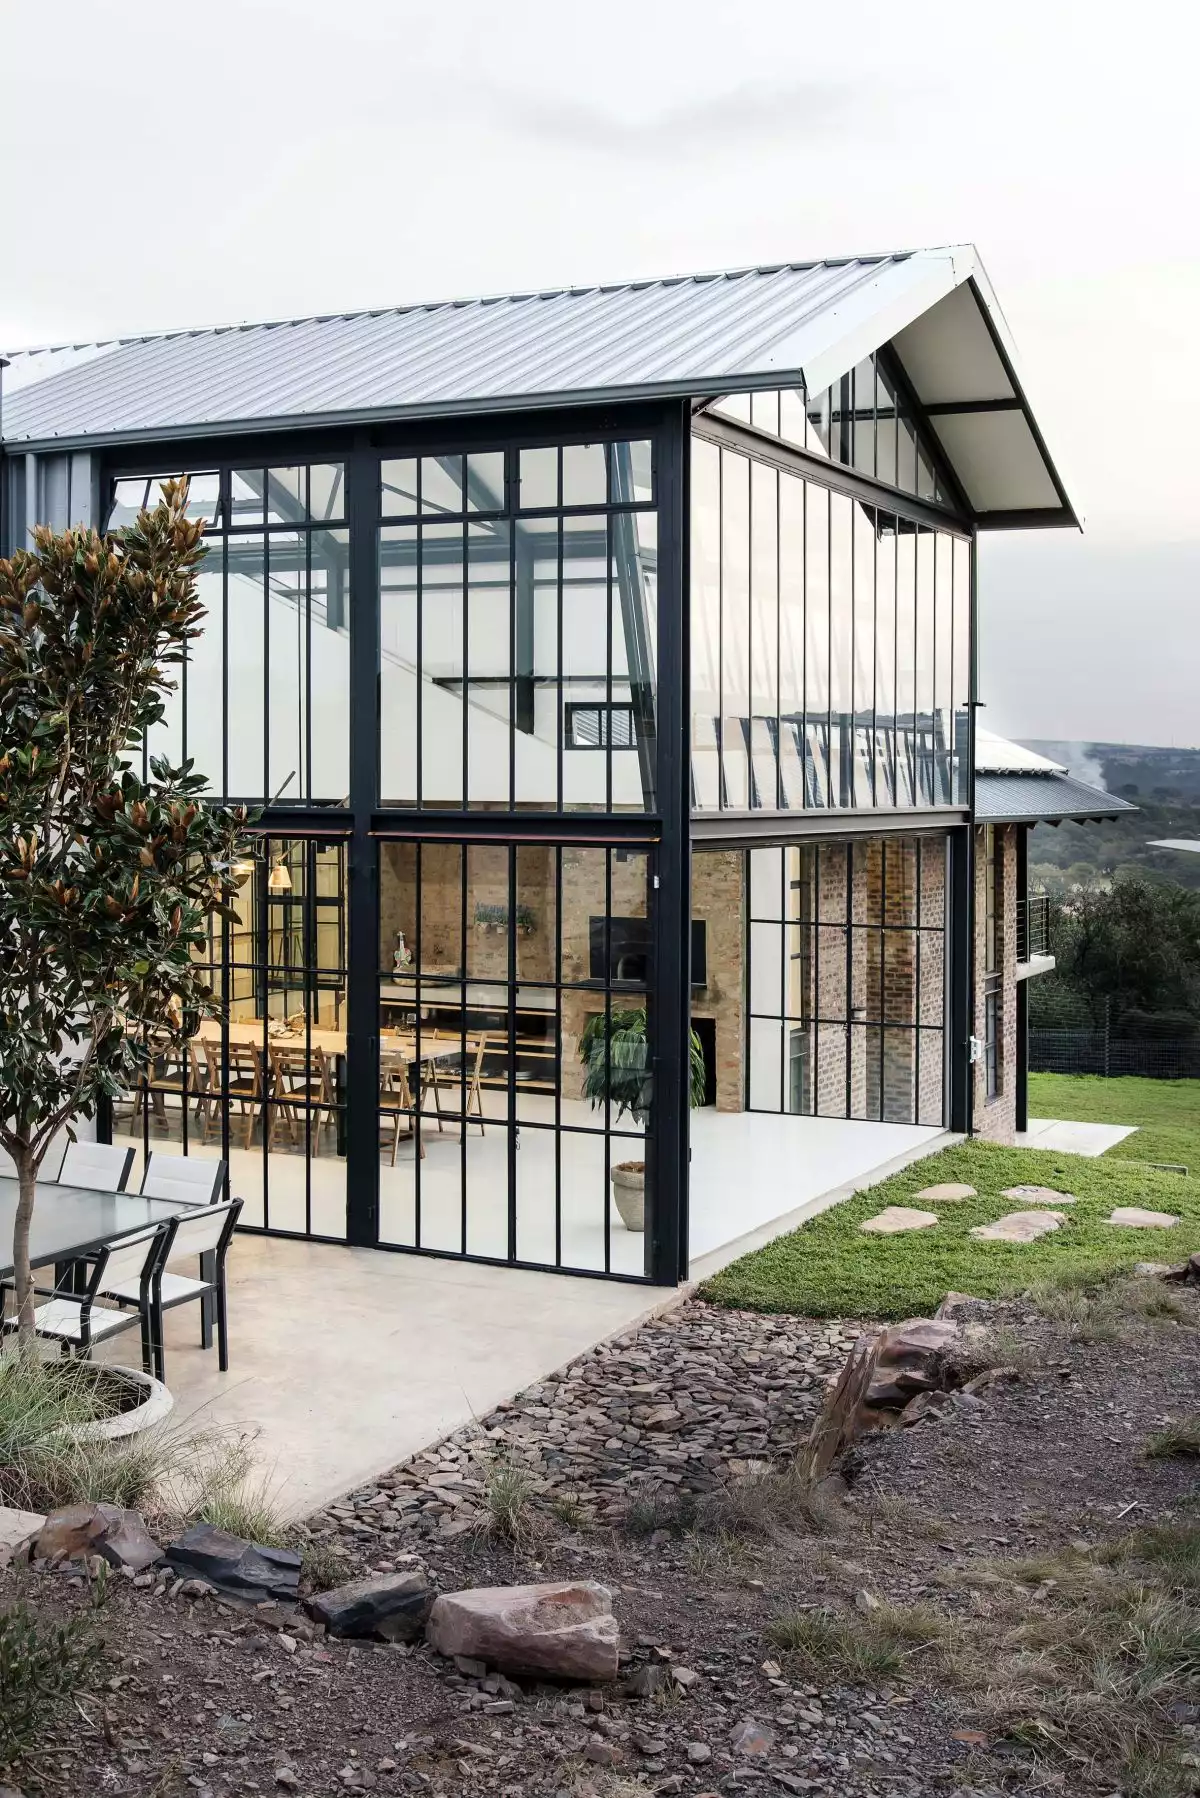 The double-height glass volume has a gabled roof and is filled with indoor plants which strengthens the connection between the house and the outdoors